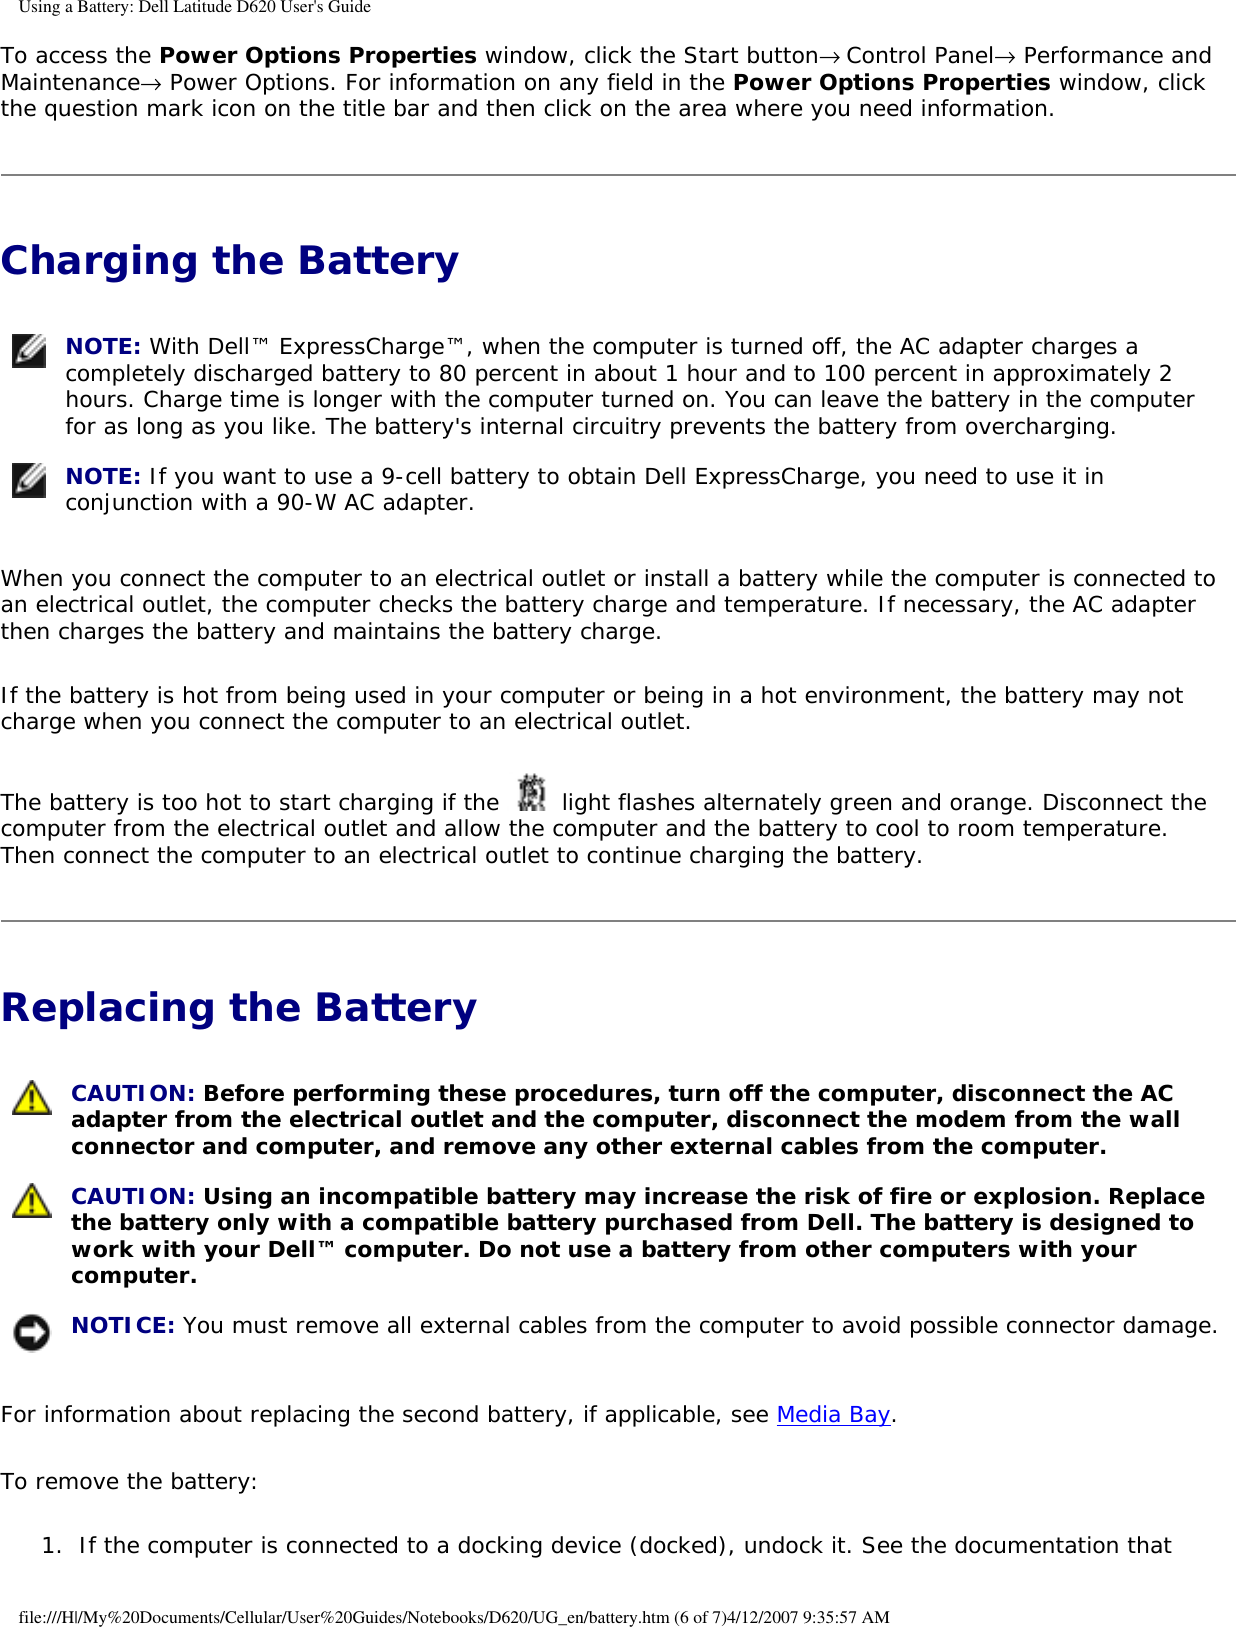 Using a Battery: Dell Latitude D620 User&apos;s GuideTo access the Power Options Properties window, click the Start button→ Control Panel→ Performance and Maintenance→ Power Options. For information on any field in the Power Options Properties window, click the question mark icon on the title bar and then click on the area where you need information.Charging the Battery  NOTE: With Dell™ ExpressCharge™, when the computer is turned off, the AC adapter charges a completely discharged battery to 80 percent in about 1 hour and to 100 percent in approximately 2 hours. Charge time is longer with the computer turned on. You can leave the battery in the computer for as long as you like. The battery&apos;s internal circuitry prevents the battery from overcharging. NOTE: If you want to use a 9-cell battery to obtain Dell ExpressCharge, you need to use it in conjunction with a 90-W AC adapter.When you connect the computer to an electrical outlet or install a battery while the computer is connected to an electrical outlet, the computer checks the battery charge and temperature. If necessary, the AC adapter then charges the battery and maintains the battery charge.If the battery is hot from being used in your computer or being in a hot environment, the battery may not charge when you connect the computer to an electrical outlet.The battery is too hot to start charging if the   light flashes alternately green and orange. Disconnect the computer from the electrical outlet and allow the computer and the battery to cool to room temperature. Then connect the computer to an electrical outlet to continue charging the battery.Replacing the Battery  CAUTION: Before performing these procedures, turn off the computer, disconnect the AC adapter from the electrical outlet and the computer, disconnect the modem from the wall connector and computer, and remove any other external cables from the computer. CAUTION: Using an incompatible battery may increase the risk of fire or explosion. Replace the battery only with a compatible battery purchased from Dell. The battery is designed to work with your Dell™ computer. Do not use a battery from other computers with your computer. NOTICE: You must remove all external cables from the computer to avoid possible connector damage.For information about replacing the second battery, if applicable, see Media Bay.To remove the battery:1.  If the computer is connected to a docking device (docked), undock it. See the documentation that file:///H|/My%20Documents/Cellular/User%20Guides/Notebooks/D620/UG_en/battery.htm (6 of 7)4/12/2007 9:35:57 AM